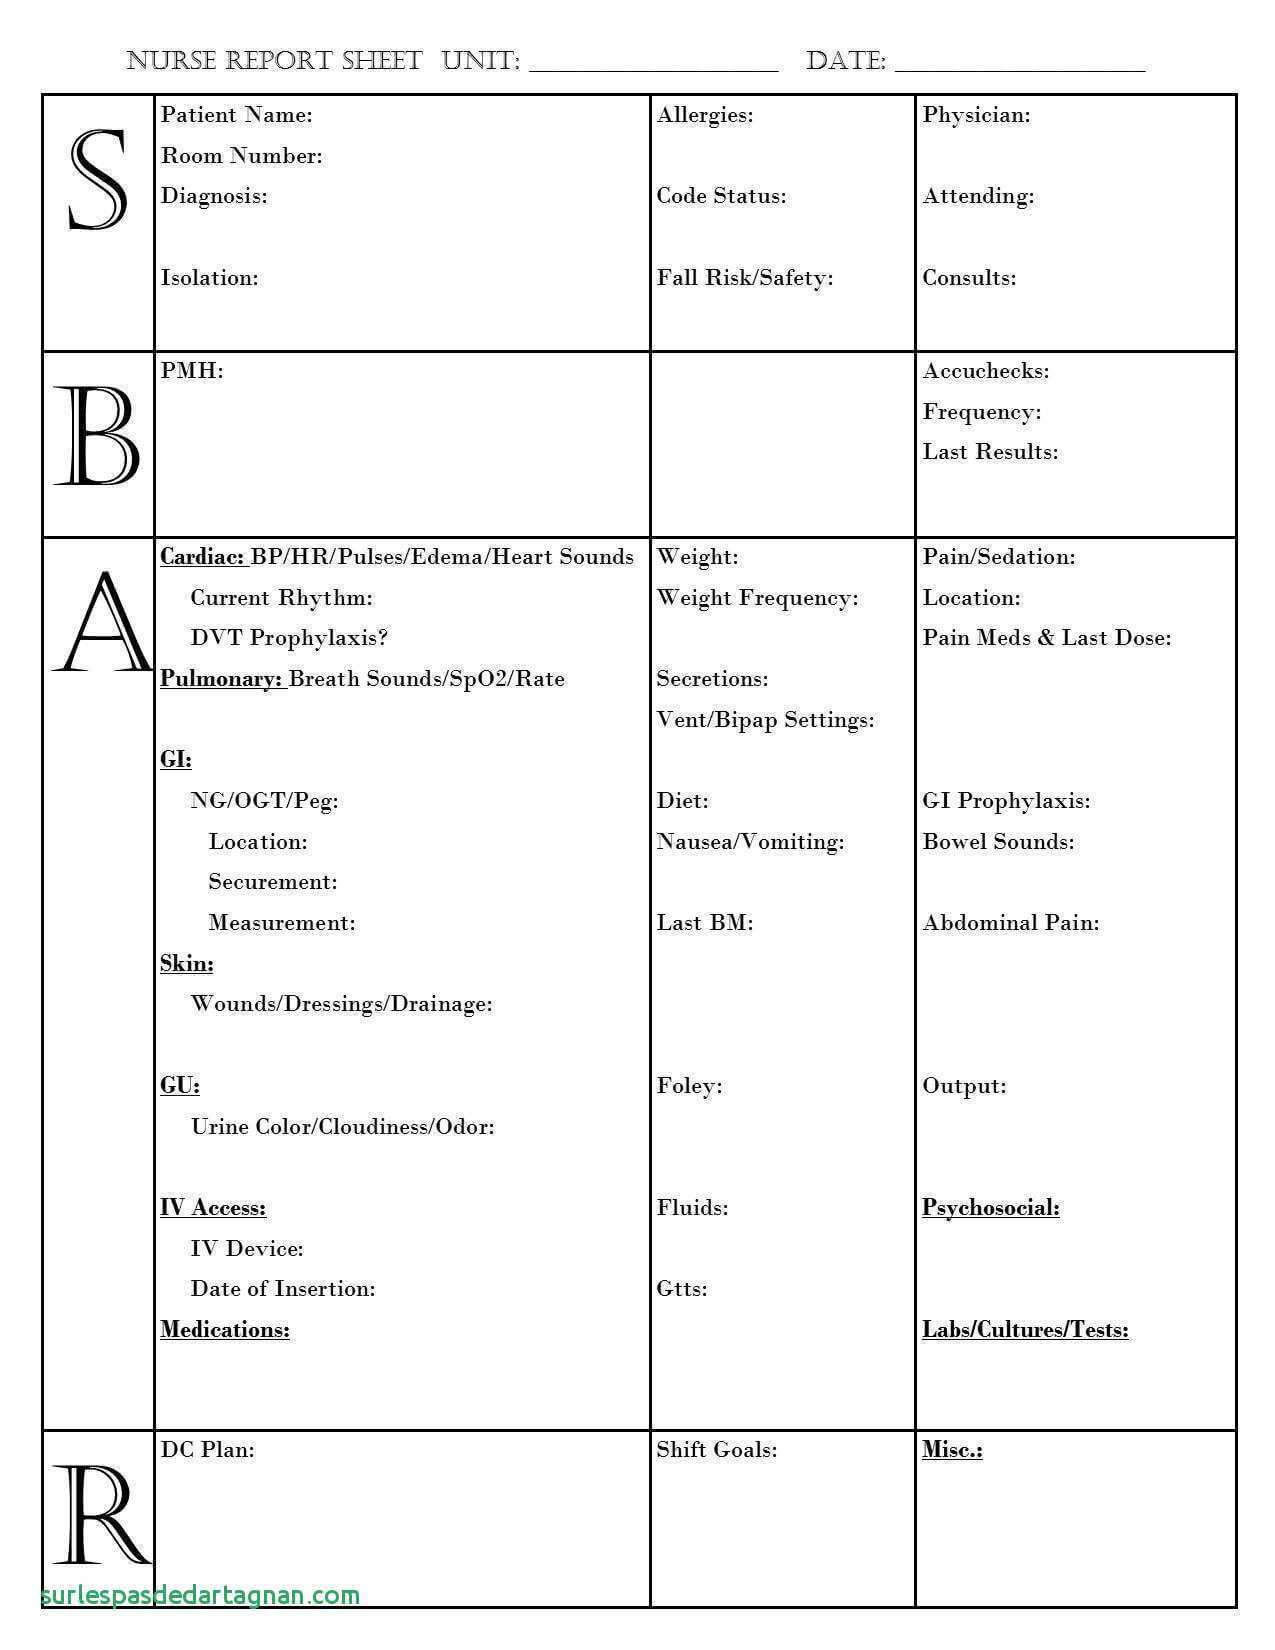 014 Nursing Shift Report Template Unforgettable Ideas Sheet Intended For Med Surg Report Sheet Templates